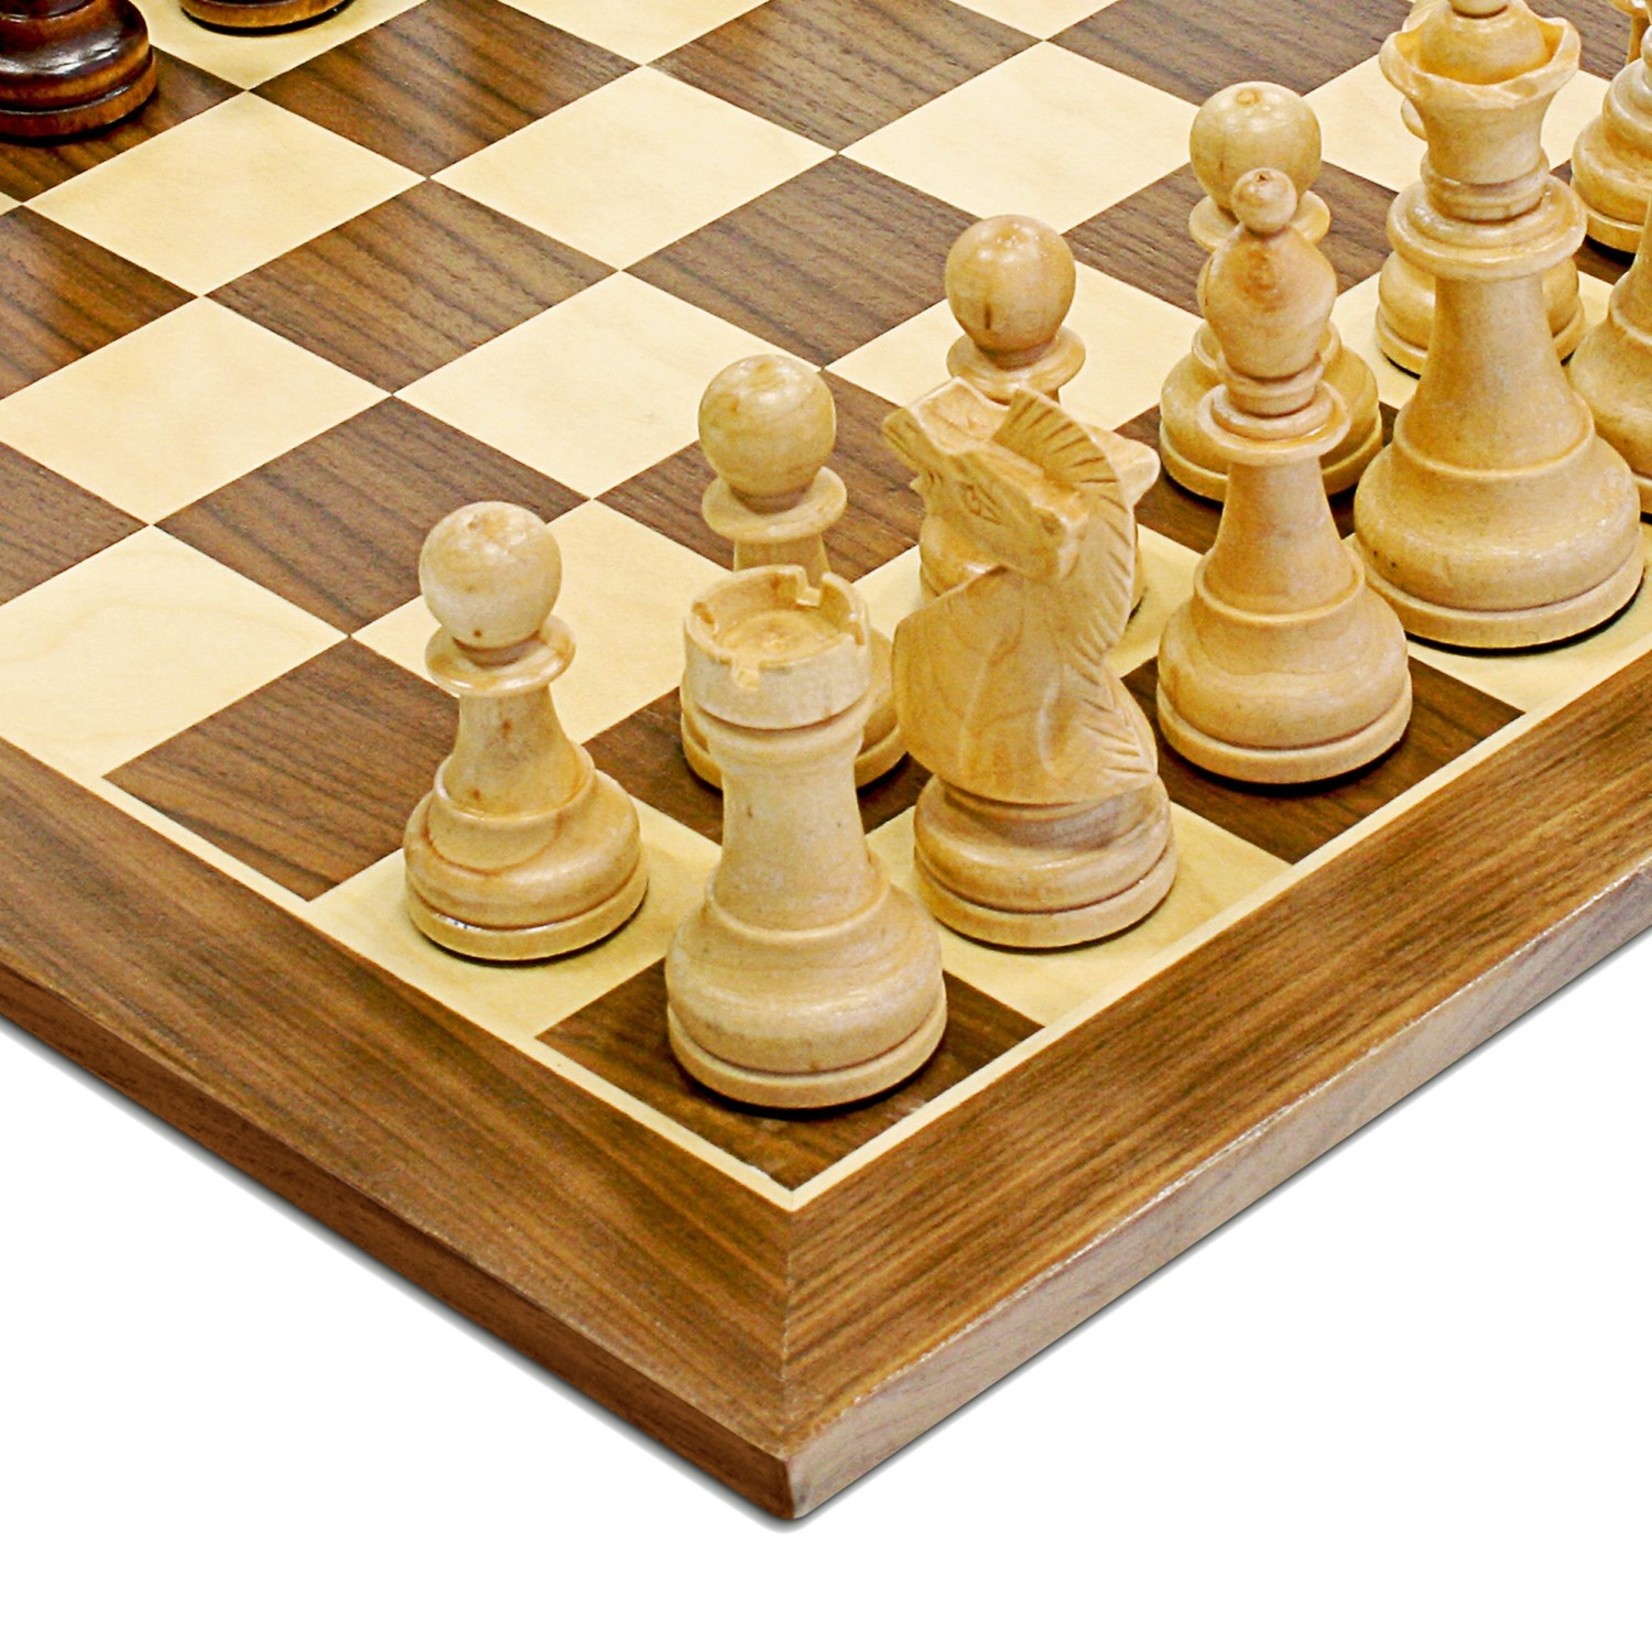 Wood Expressions Traditional Staunton Wood Chess Set. 14.75" board. 3.75" king